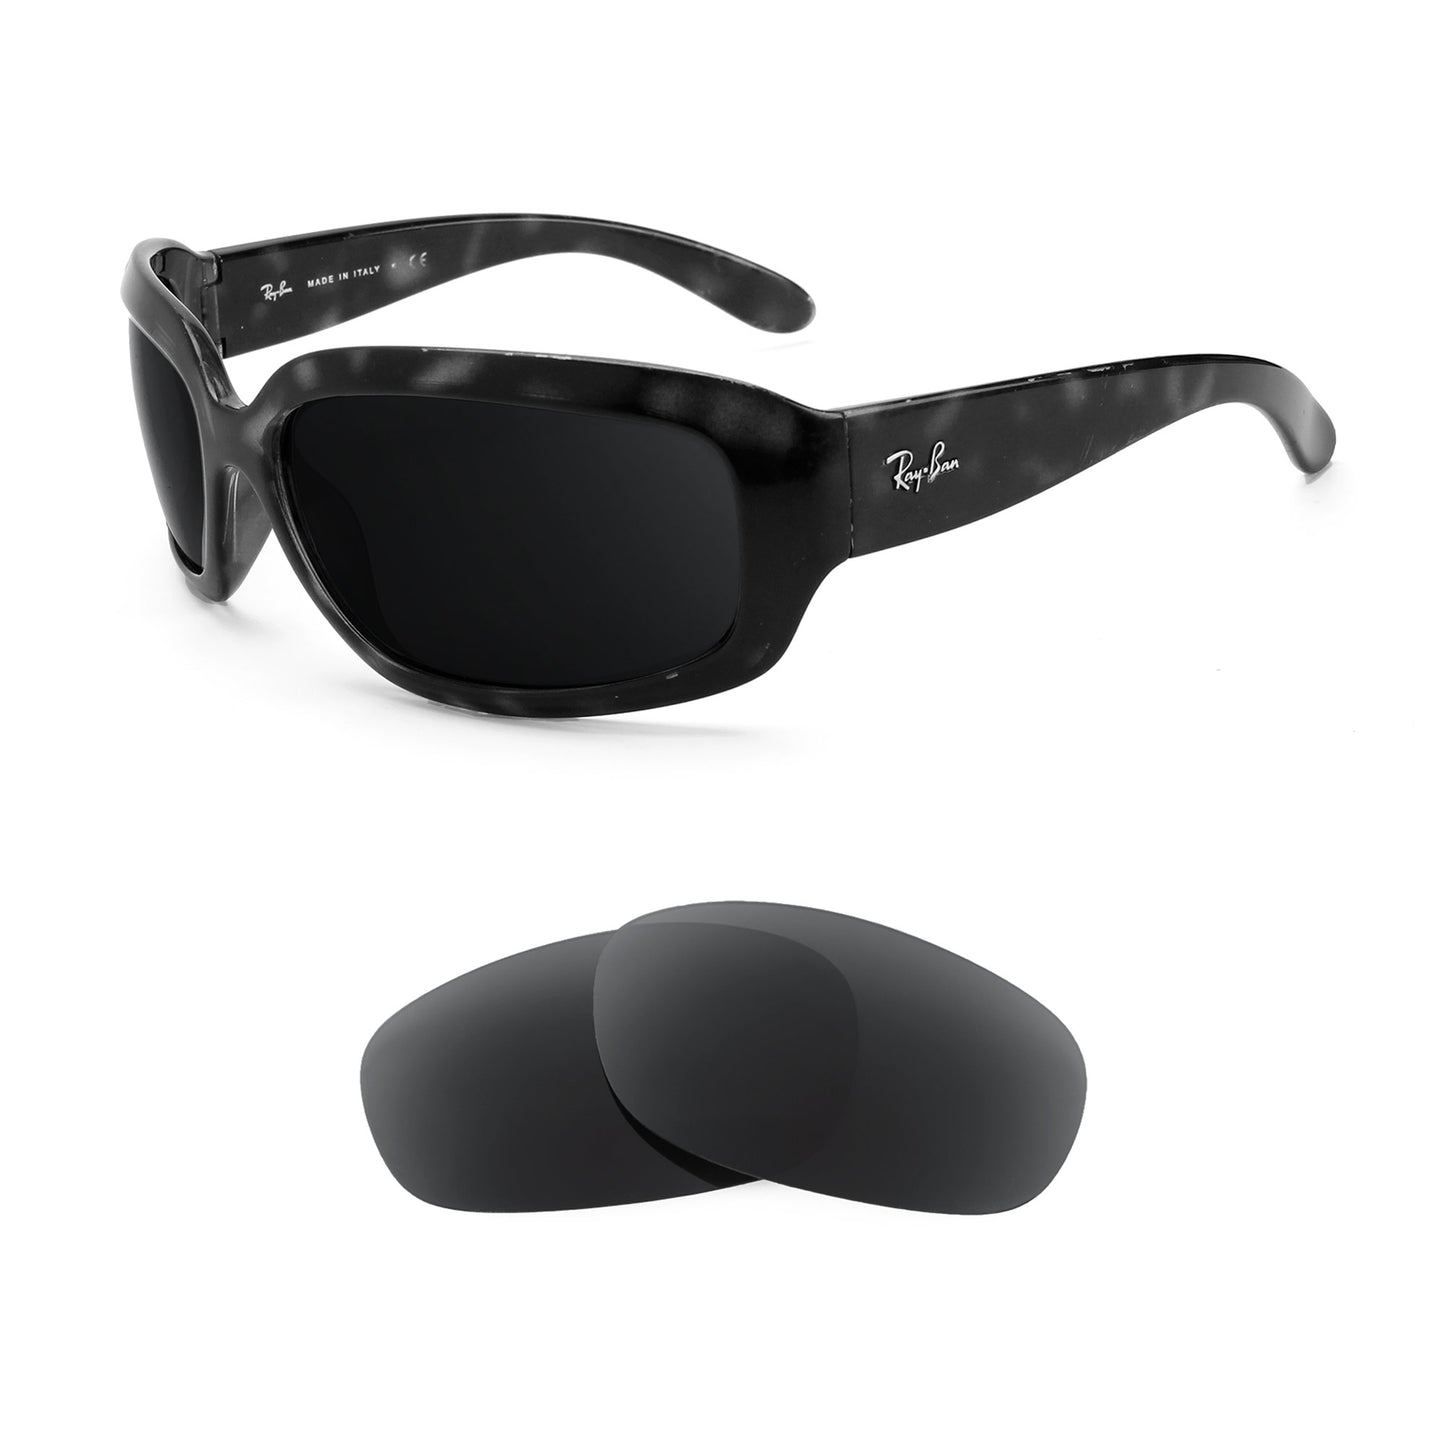 Ray-Ban RB4102 63mm sunglasses with replacement lenses